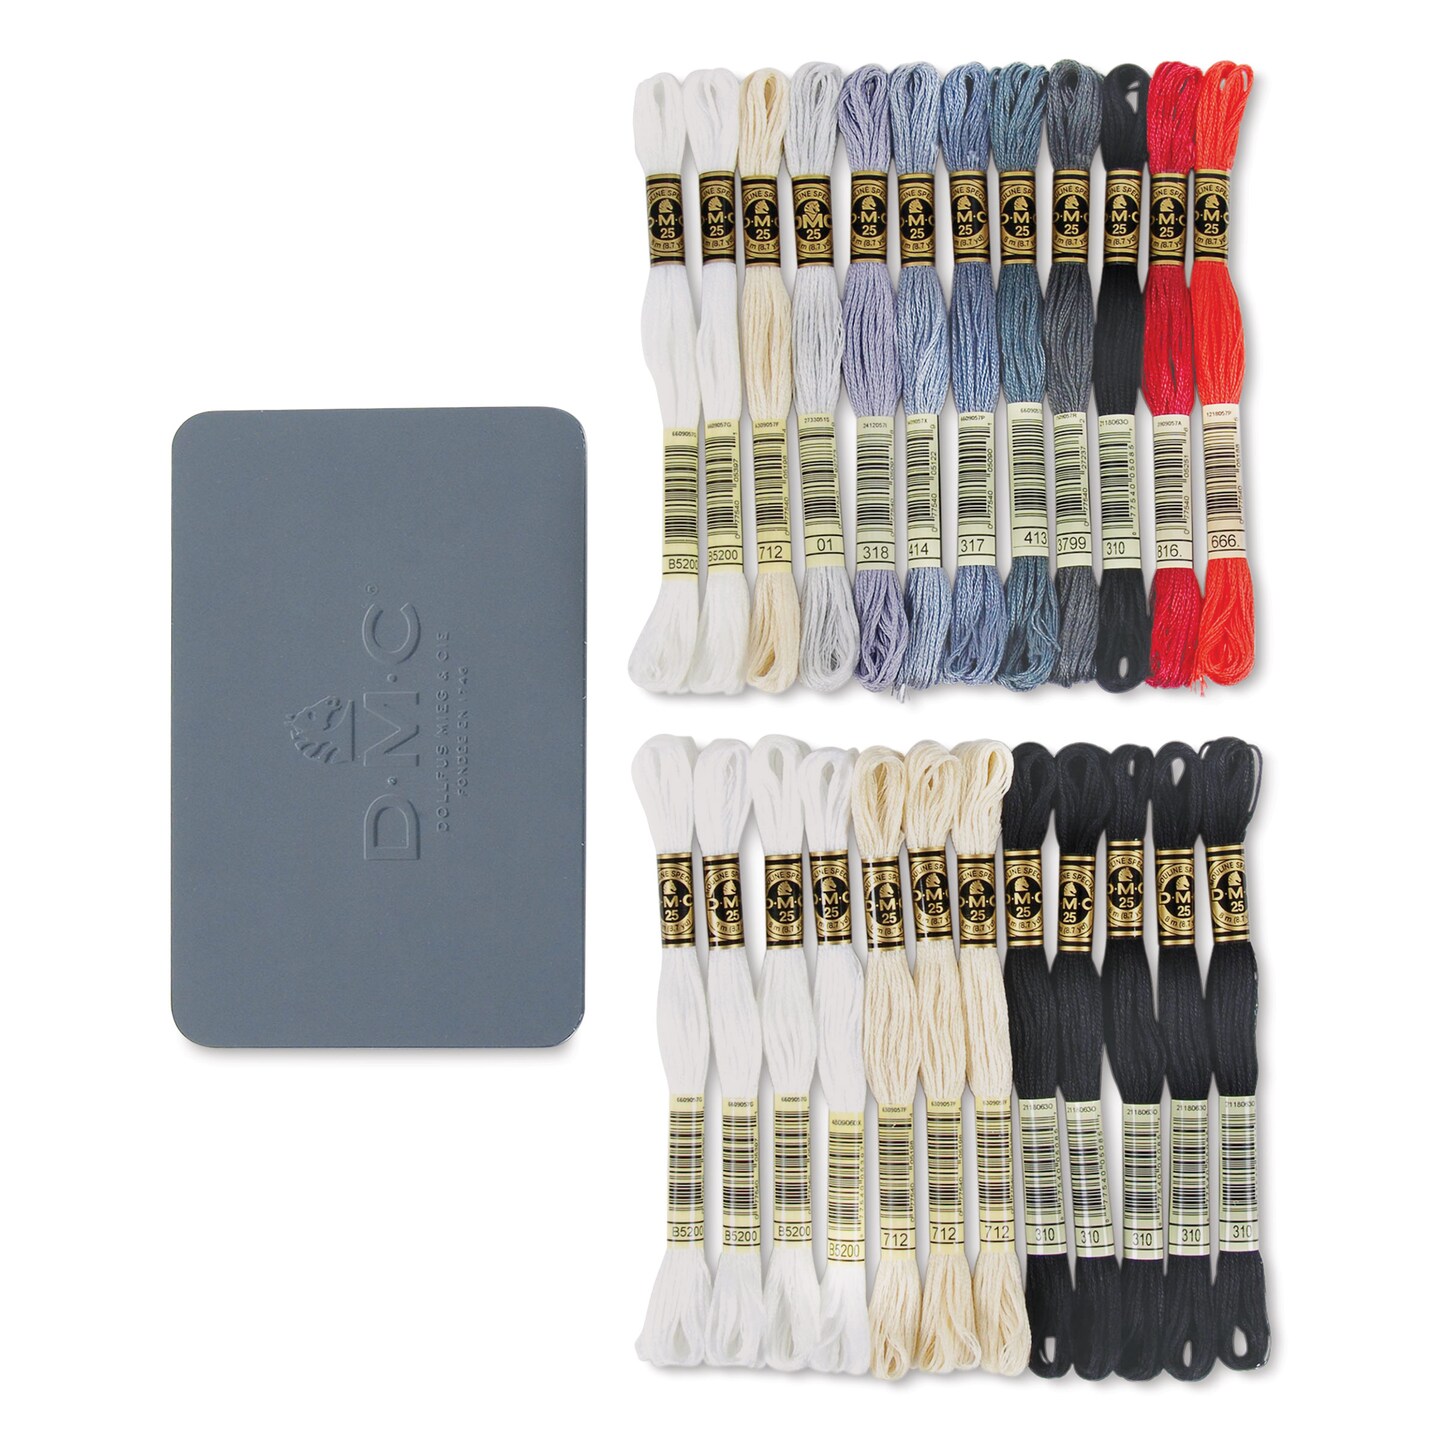 DMC Moulin&#xE9; Special Collector&#x2019;s Black Tin Embroidery Floss - Set of 24, Monochrome Colors